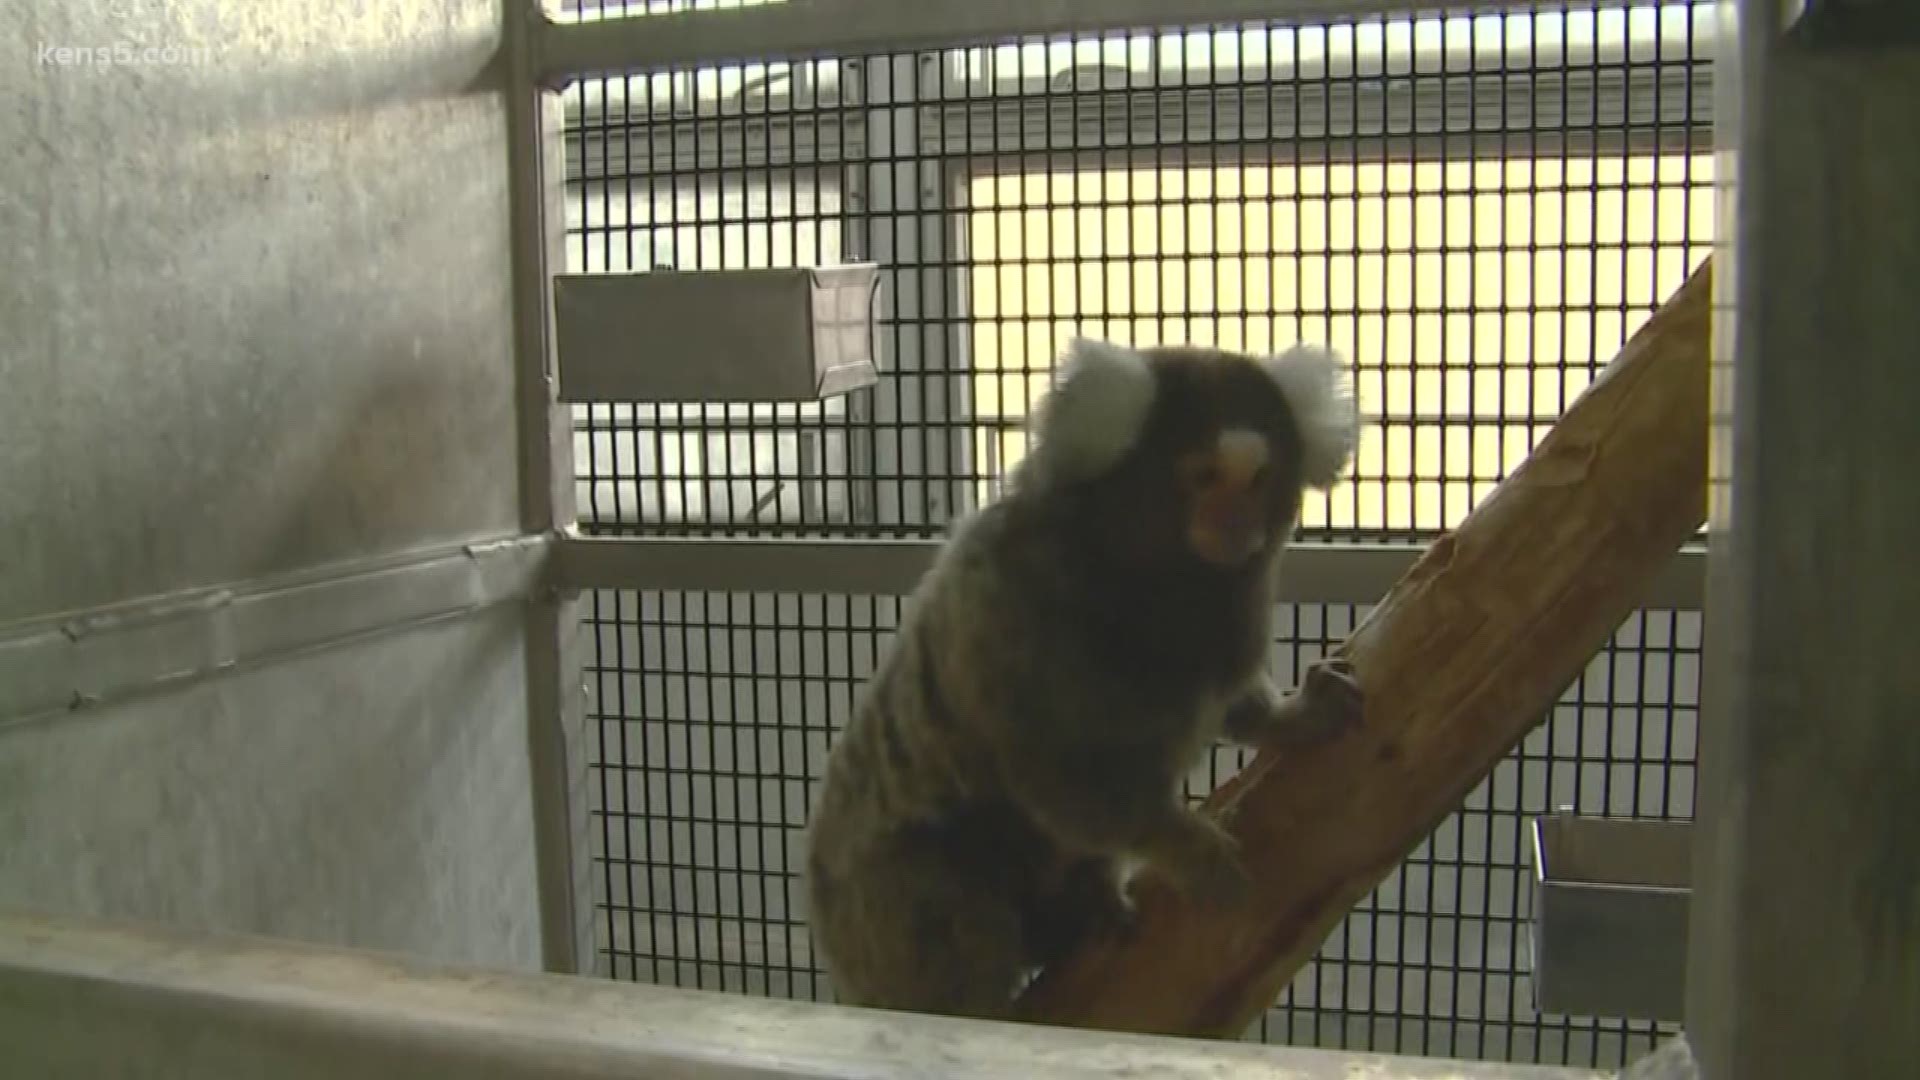 Researchers in San Antonio are paving the way for possible treatments against Parkinson's disease with the help of a specific monkey species.